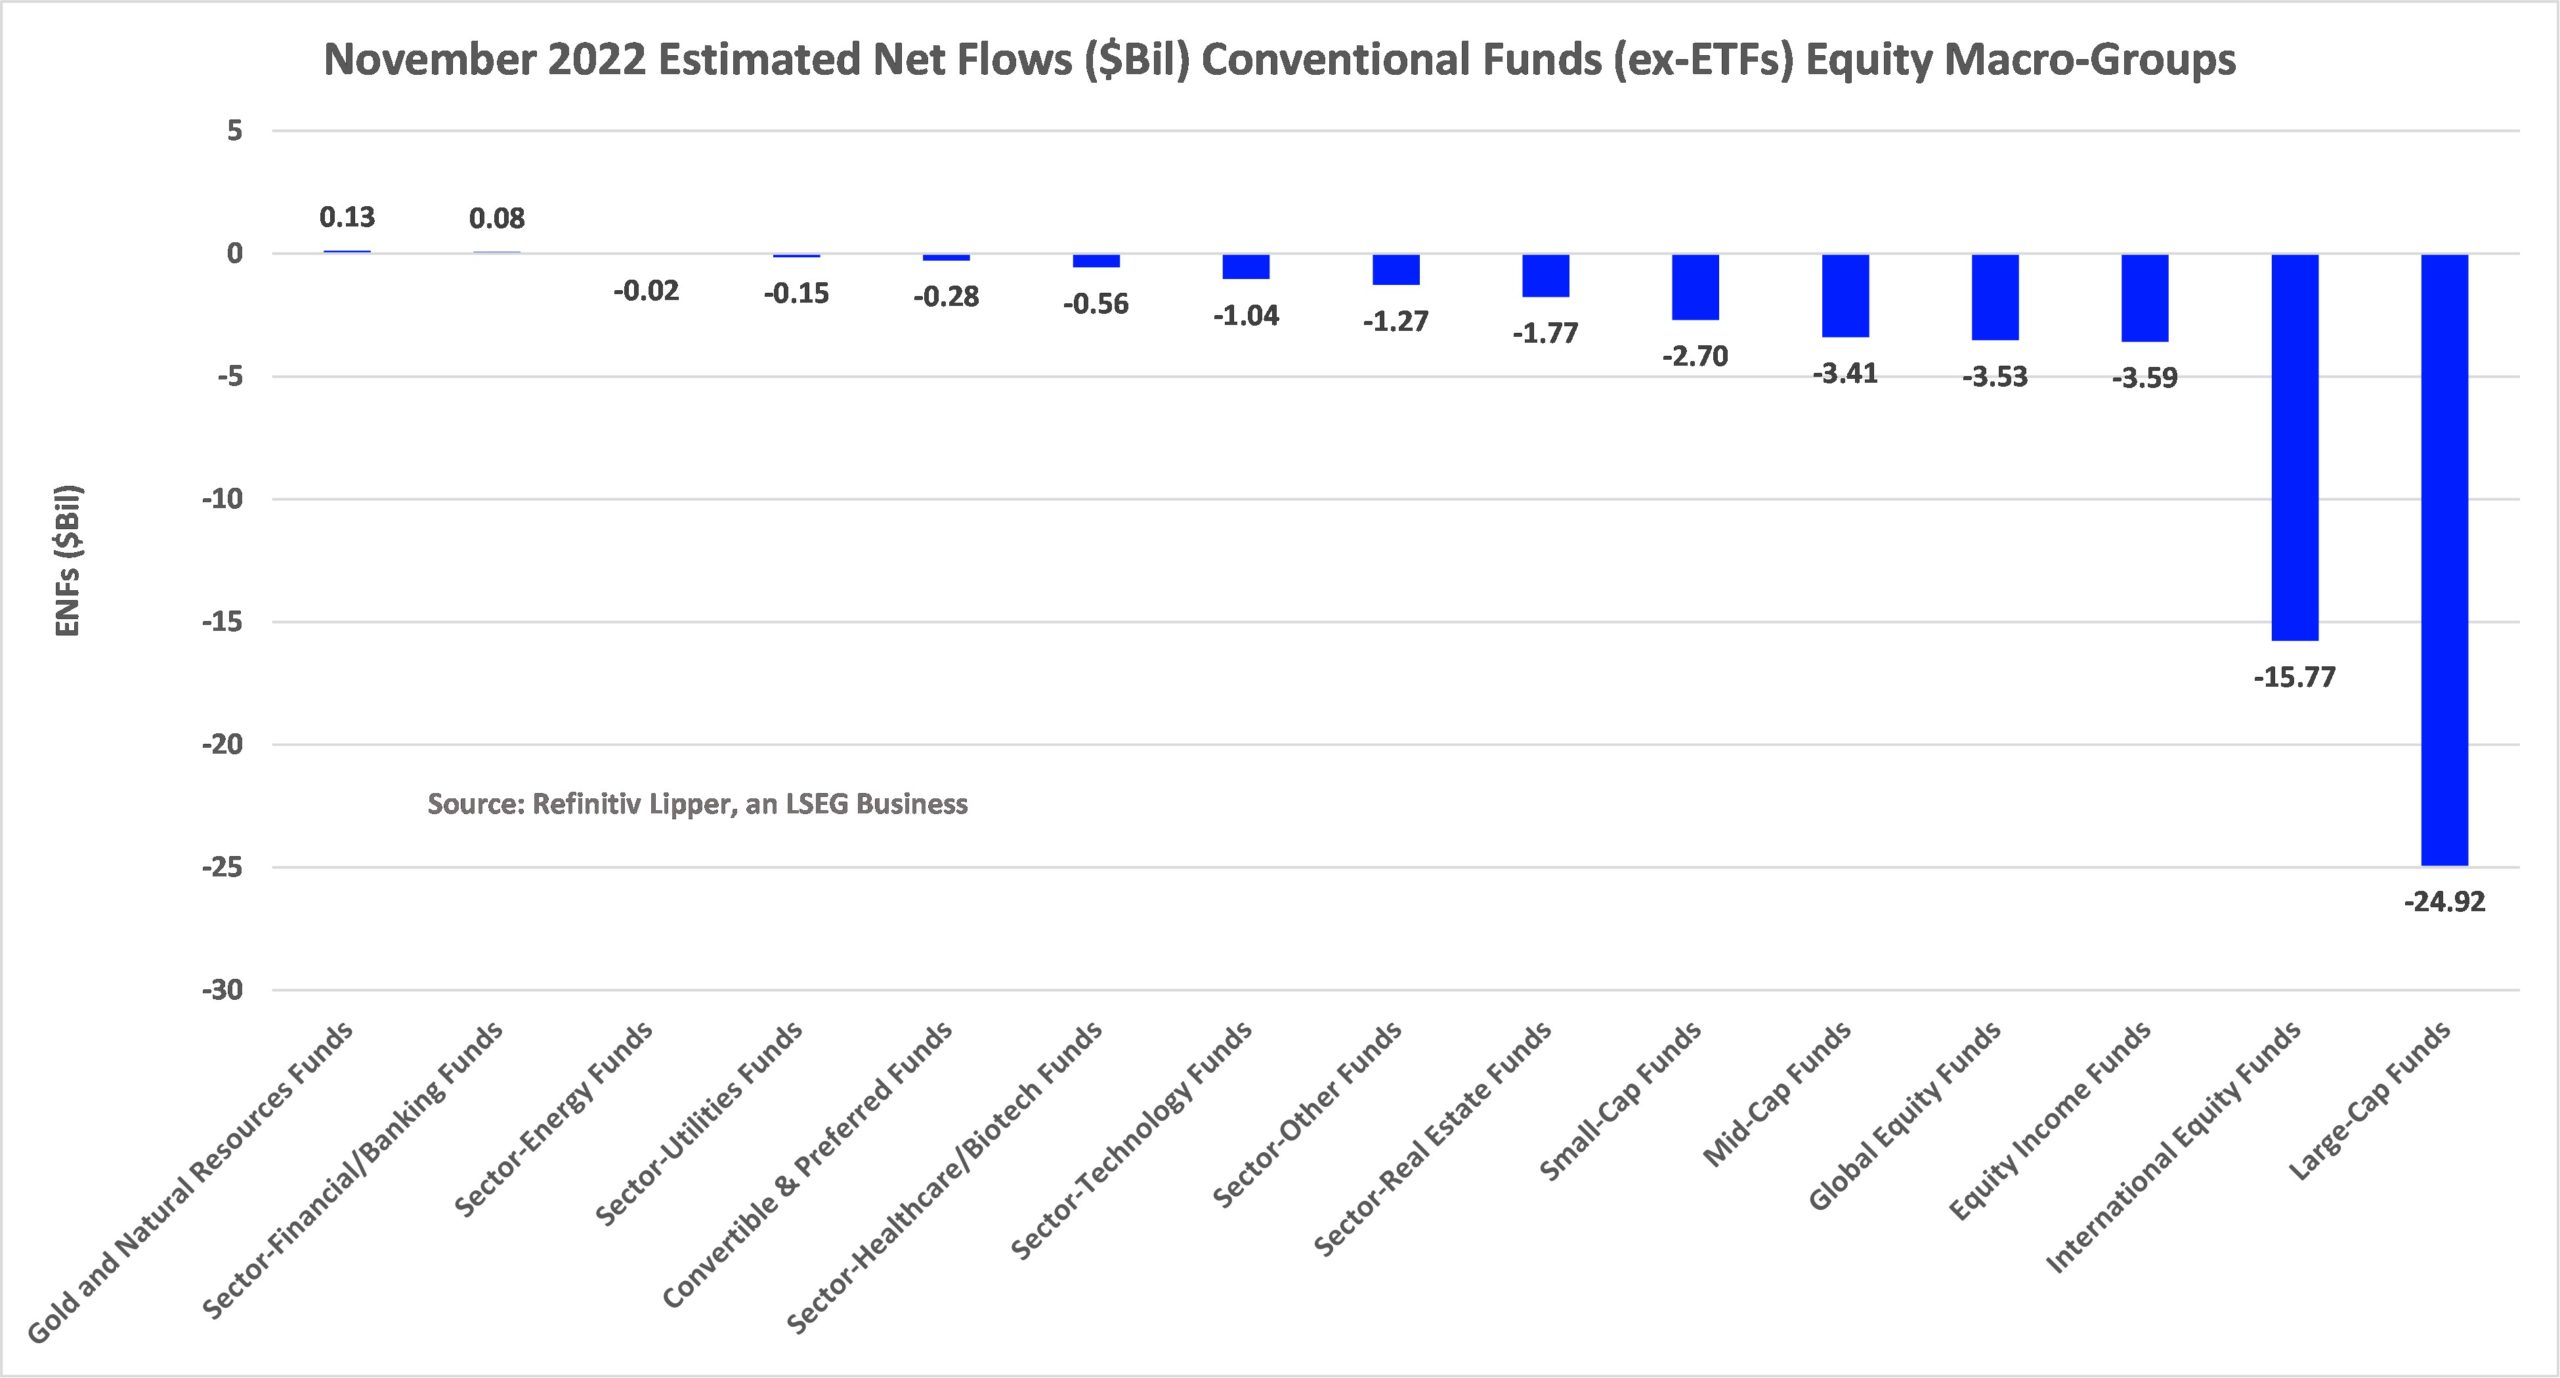 EQ Funds November 2022 ENFs by Macro Group